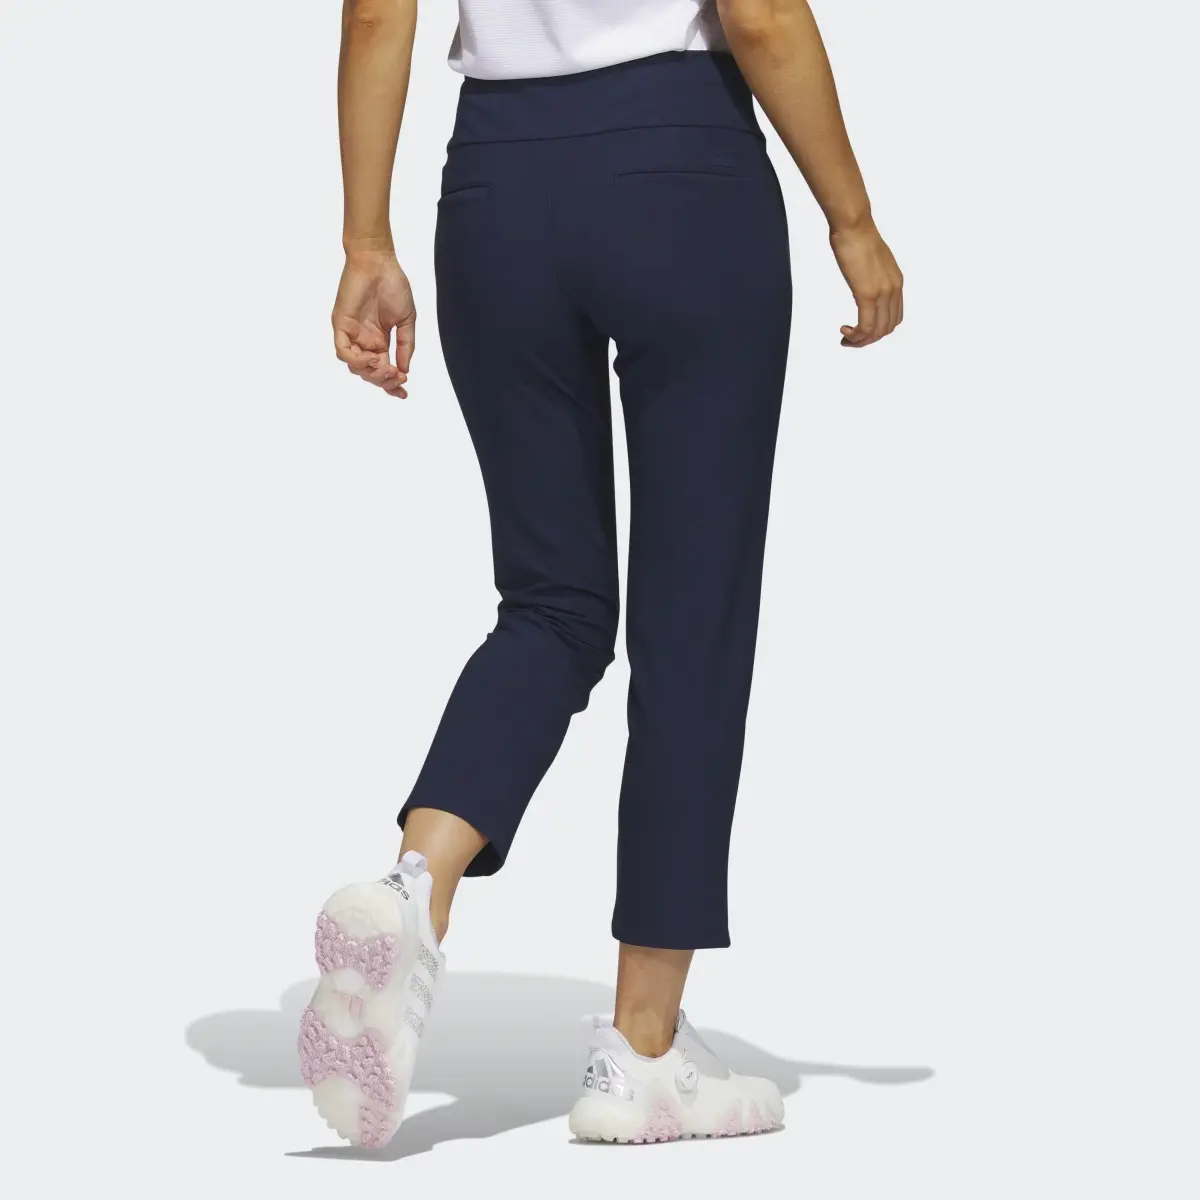 Adidas Pull-On Ankle Pull-On Ankle Golf Pants. 2